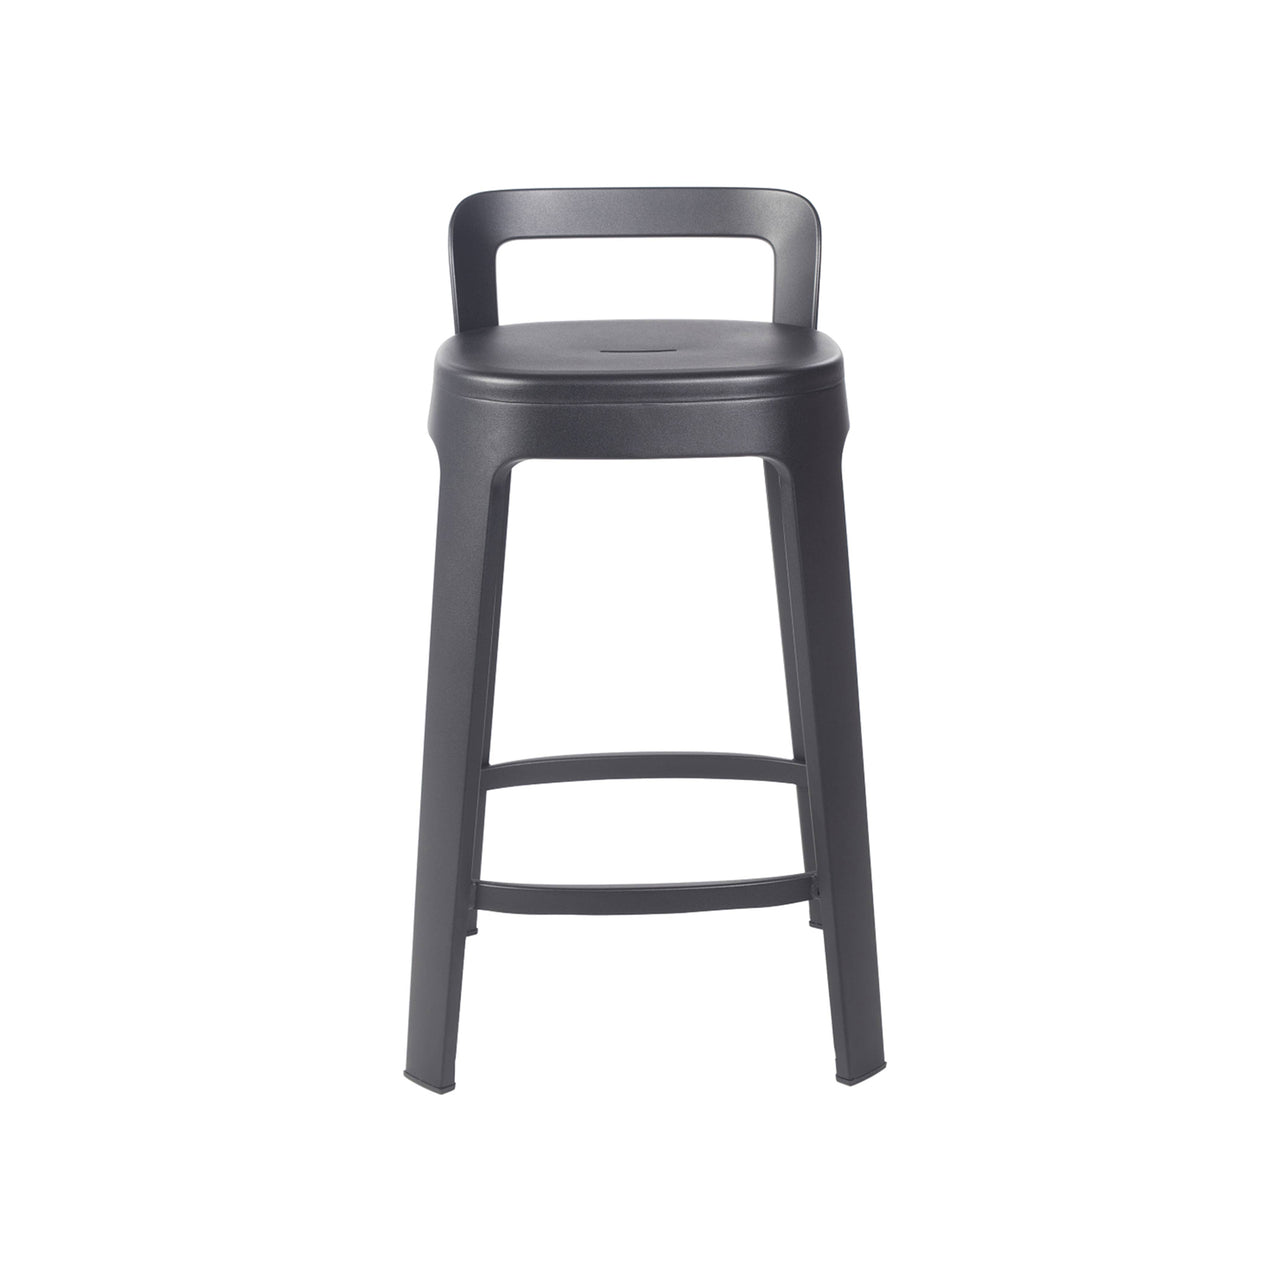 Ombra Bar + Counter Stool with Backrest: Counter + Black